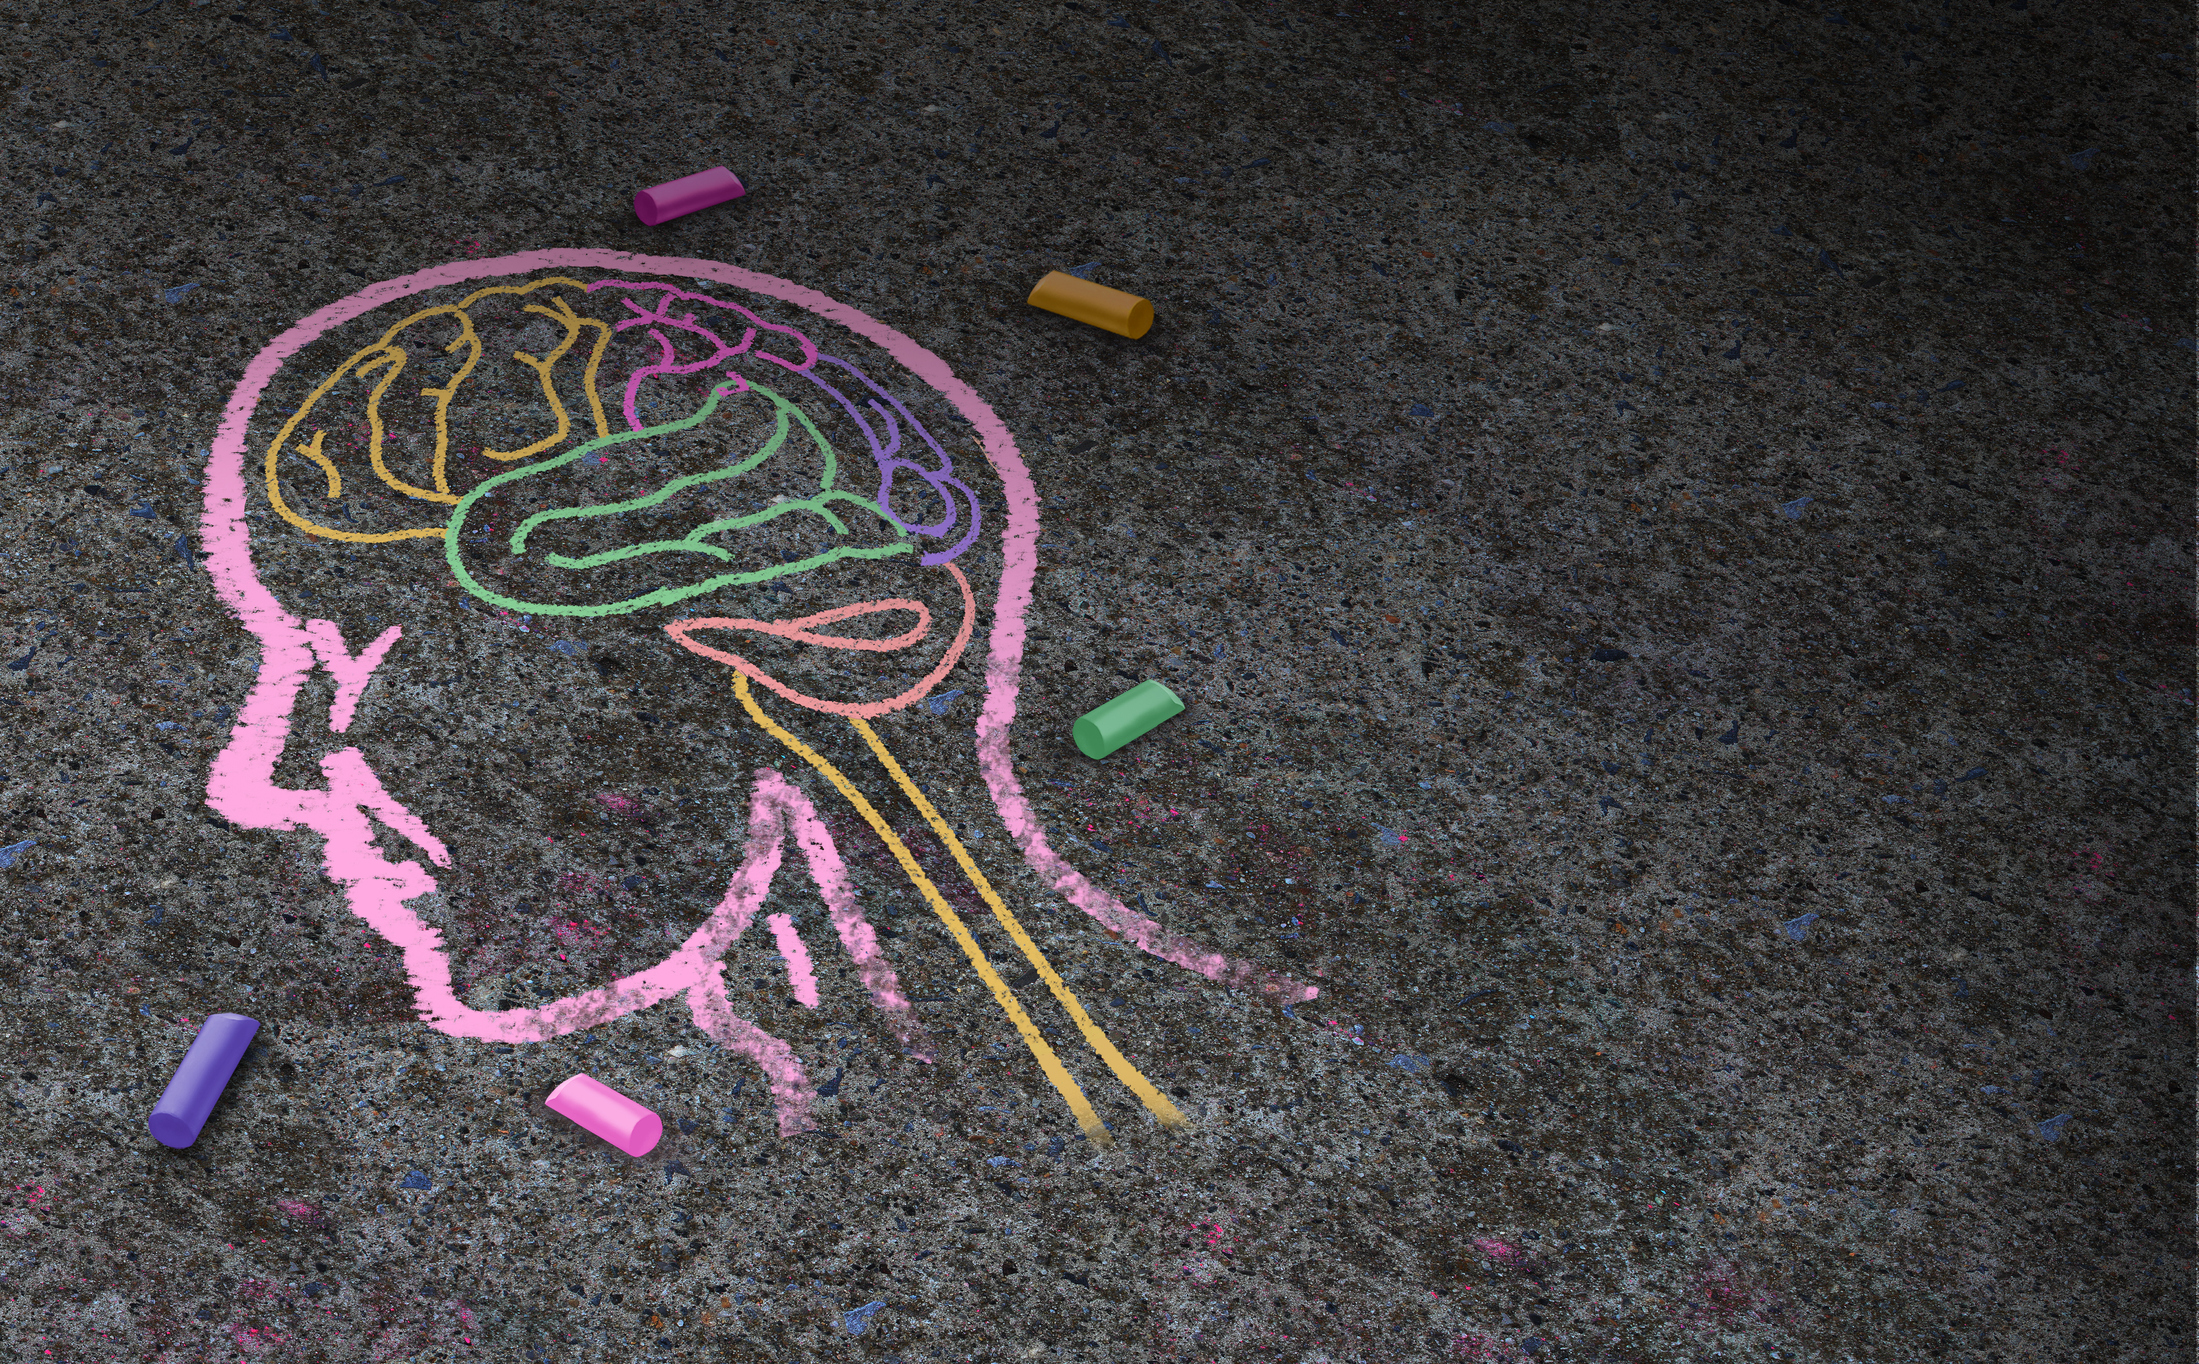 Concept of autism and autistic development disorder as a symbol of a communication and social behavior psychology as a chalk drawing on asphalt in a 3D illustration style.